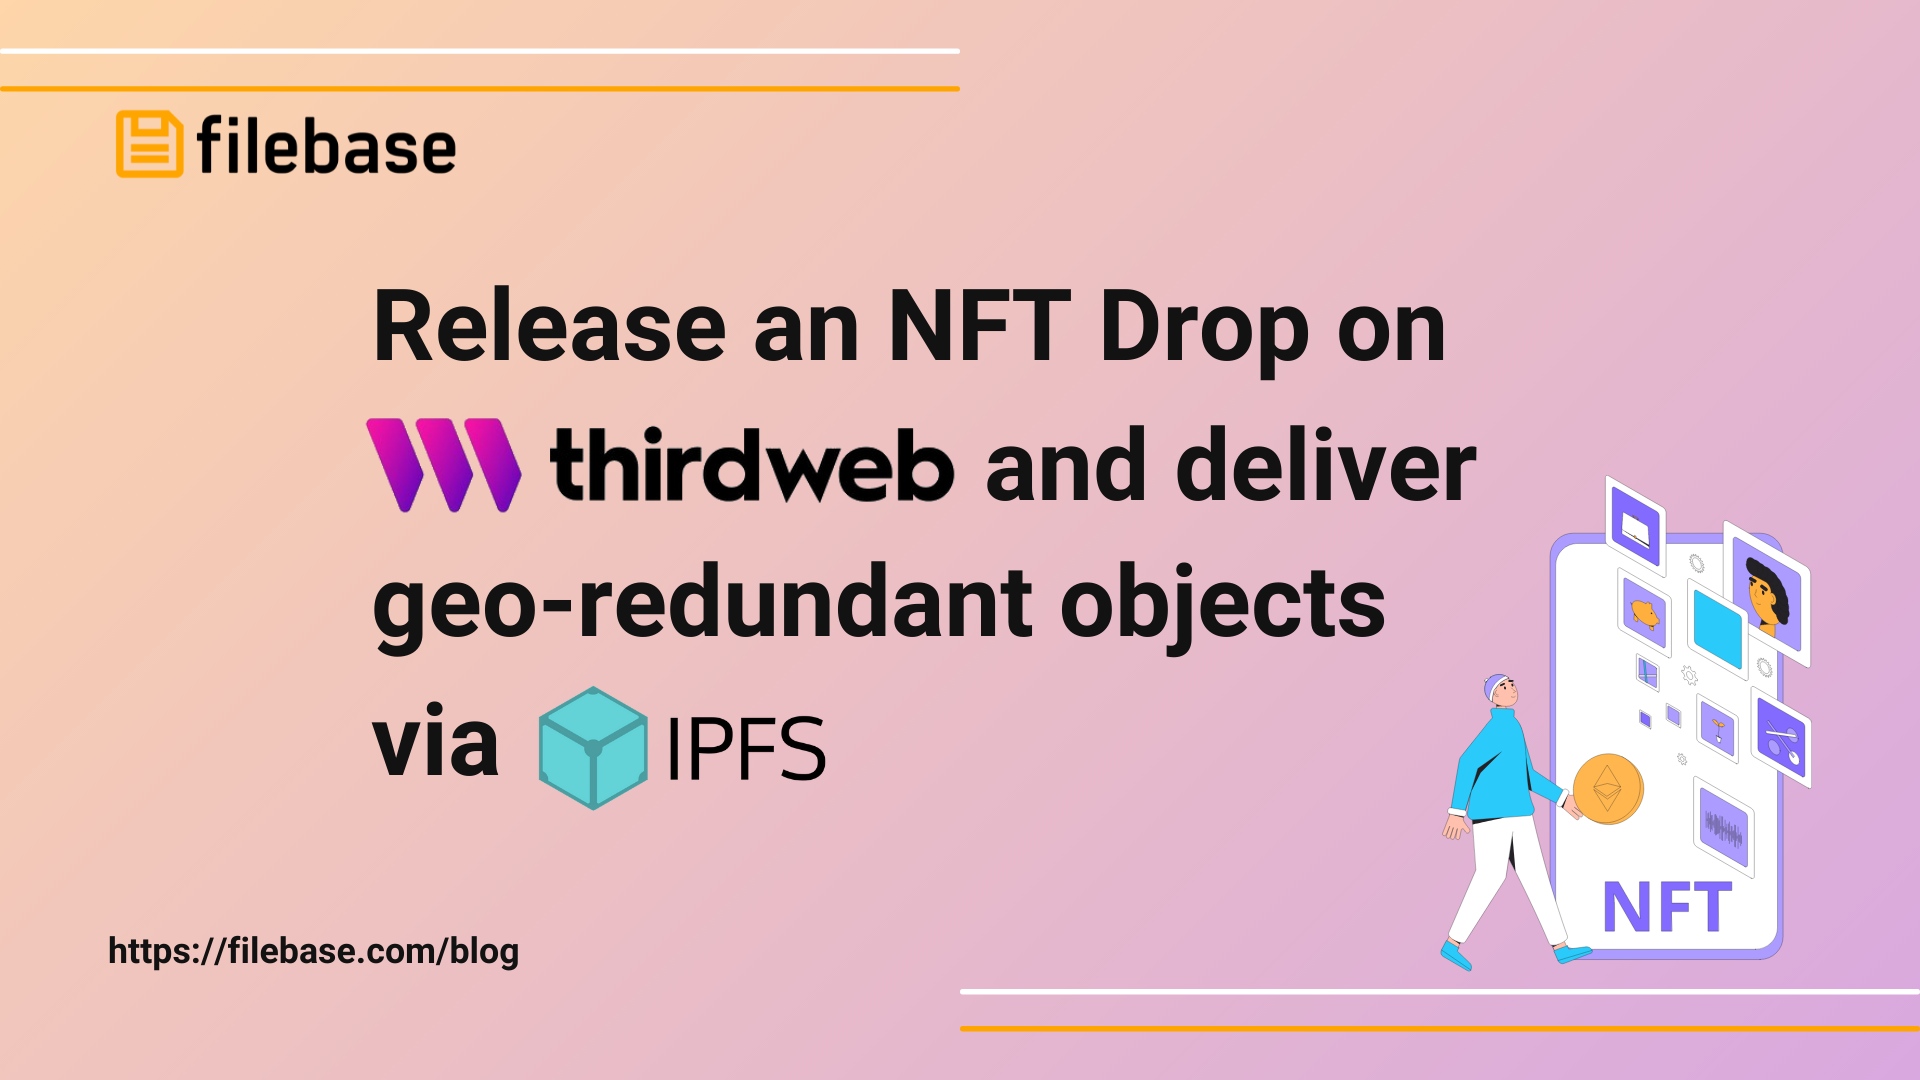 Release an NFT Drop and deliver geo-redundant objects on IPFS via Filebase